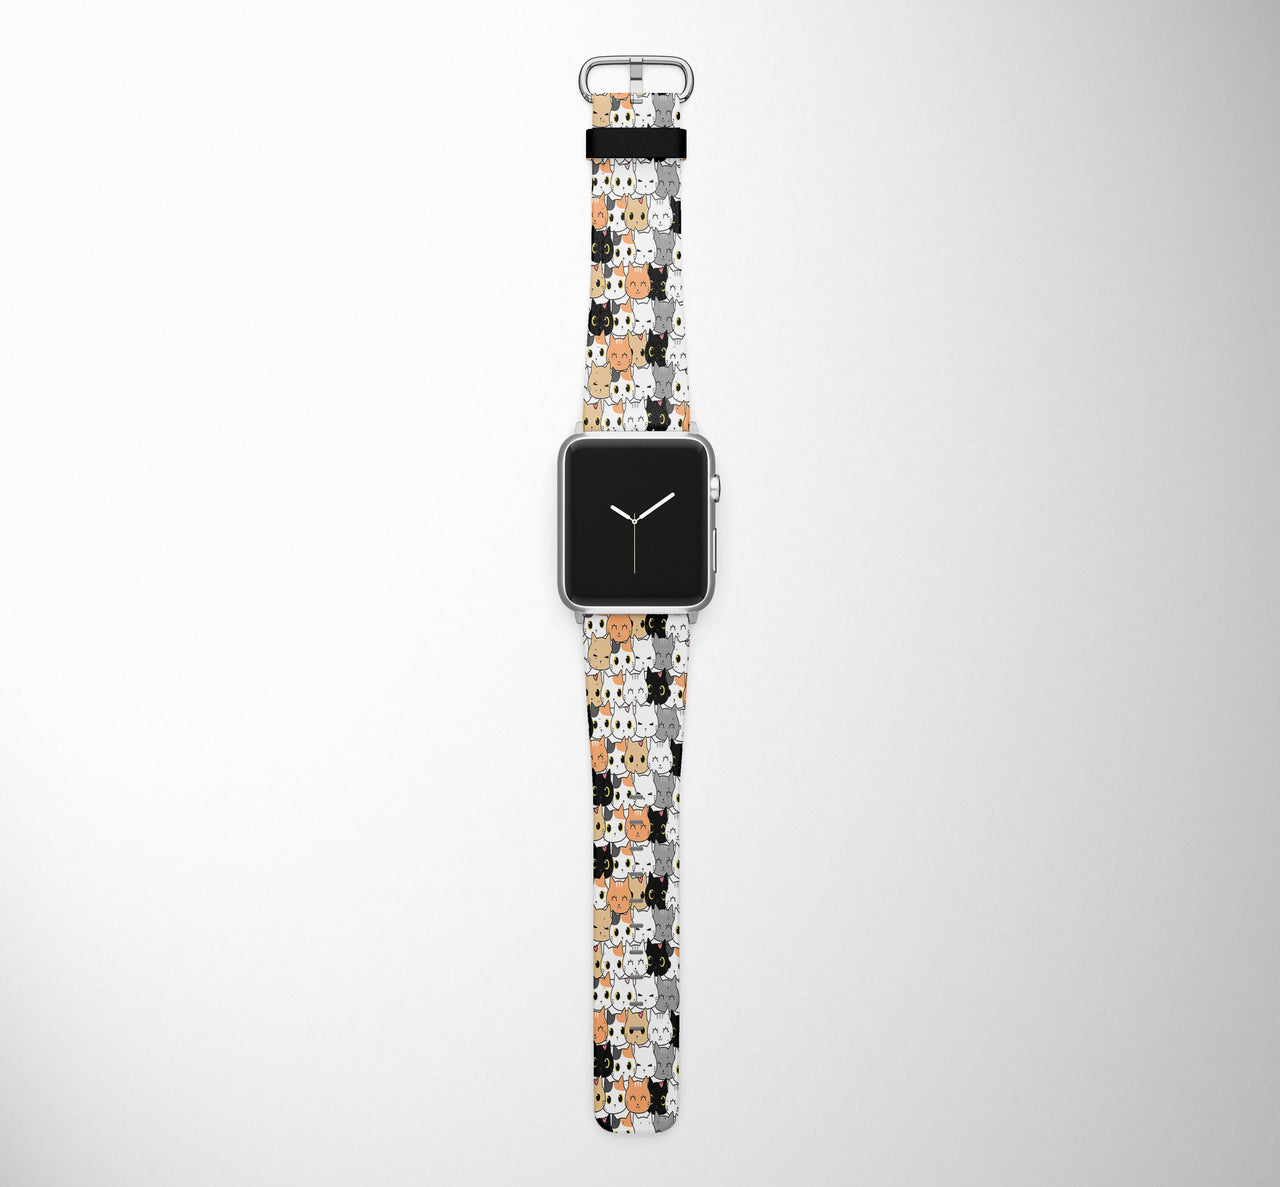 Seamless Funny Cats Designed Leather Apple Watch Straps